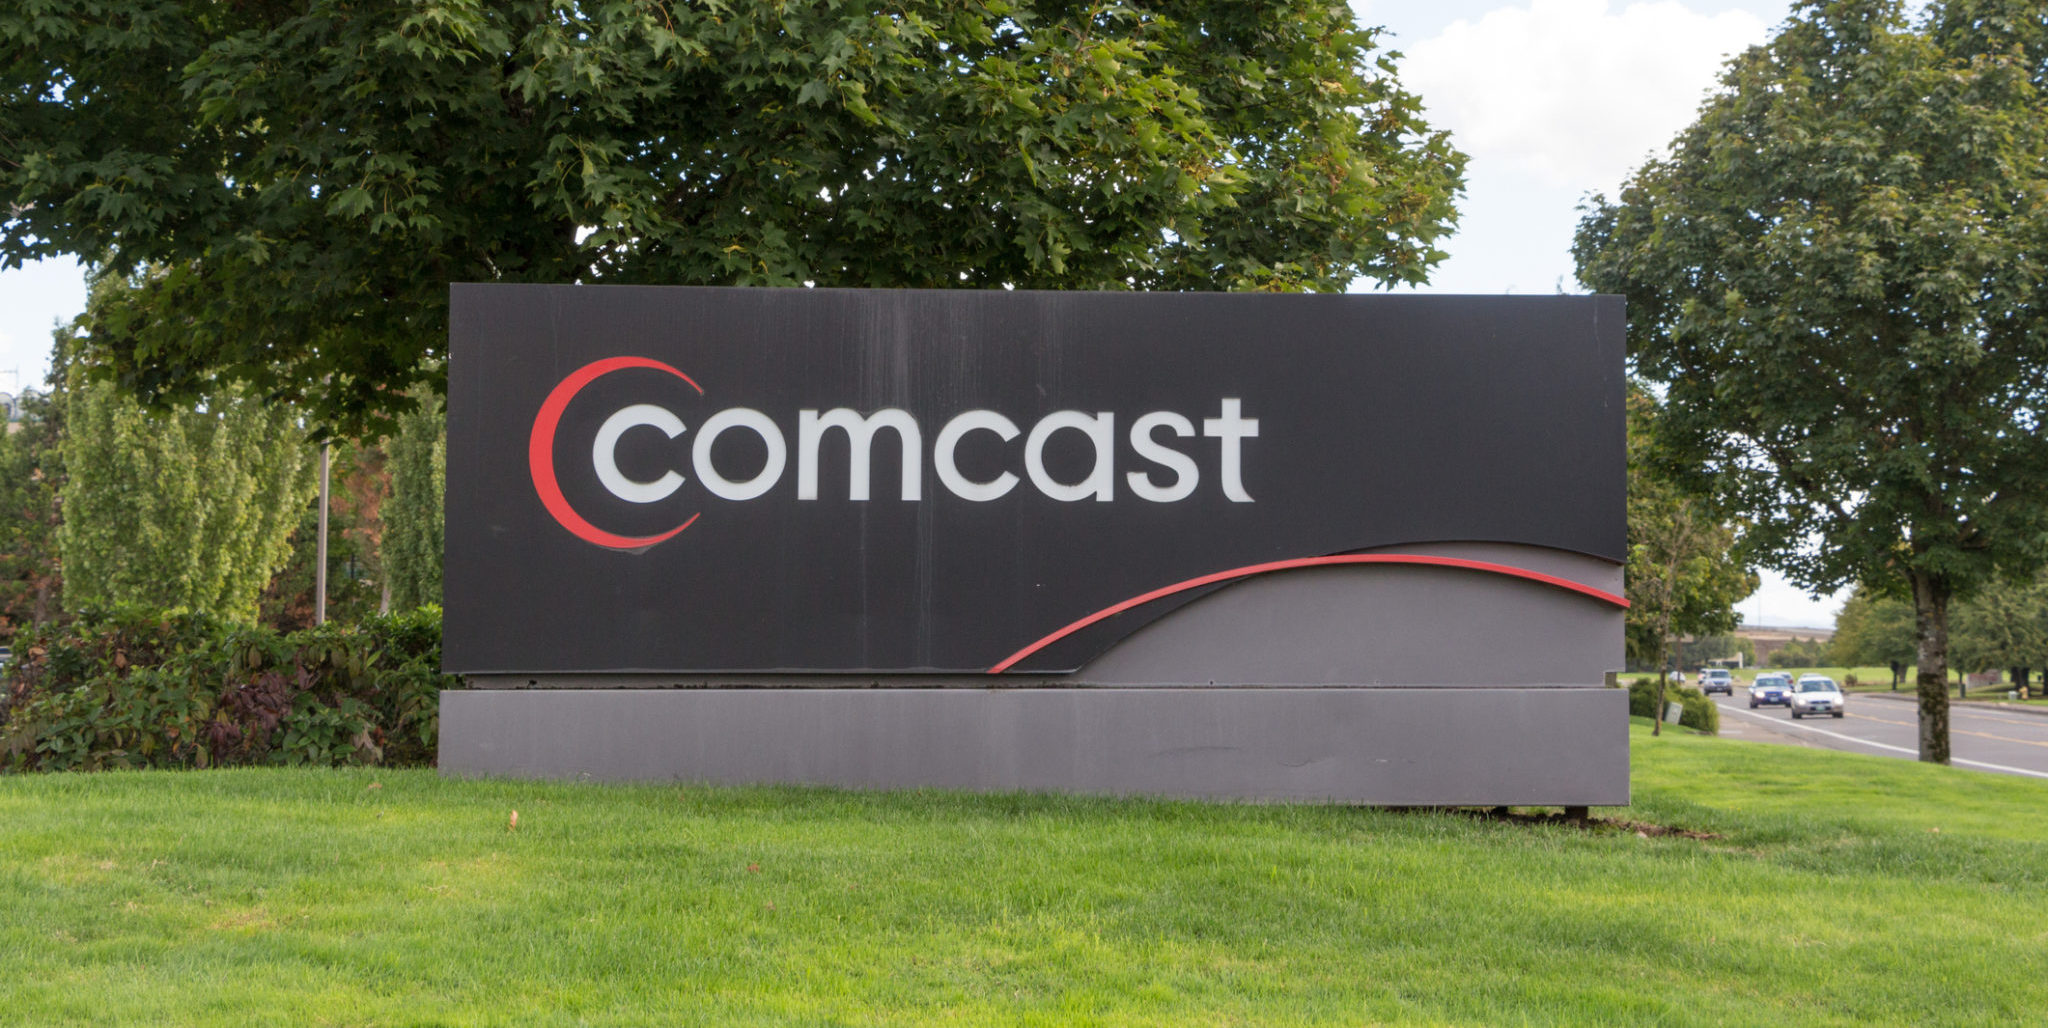 Comcast Will Launch Its Own Wireless Network To Compete With T-Mobile, Verizon and AT&T